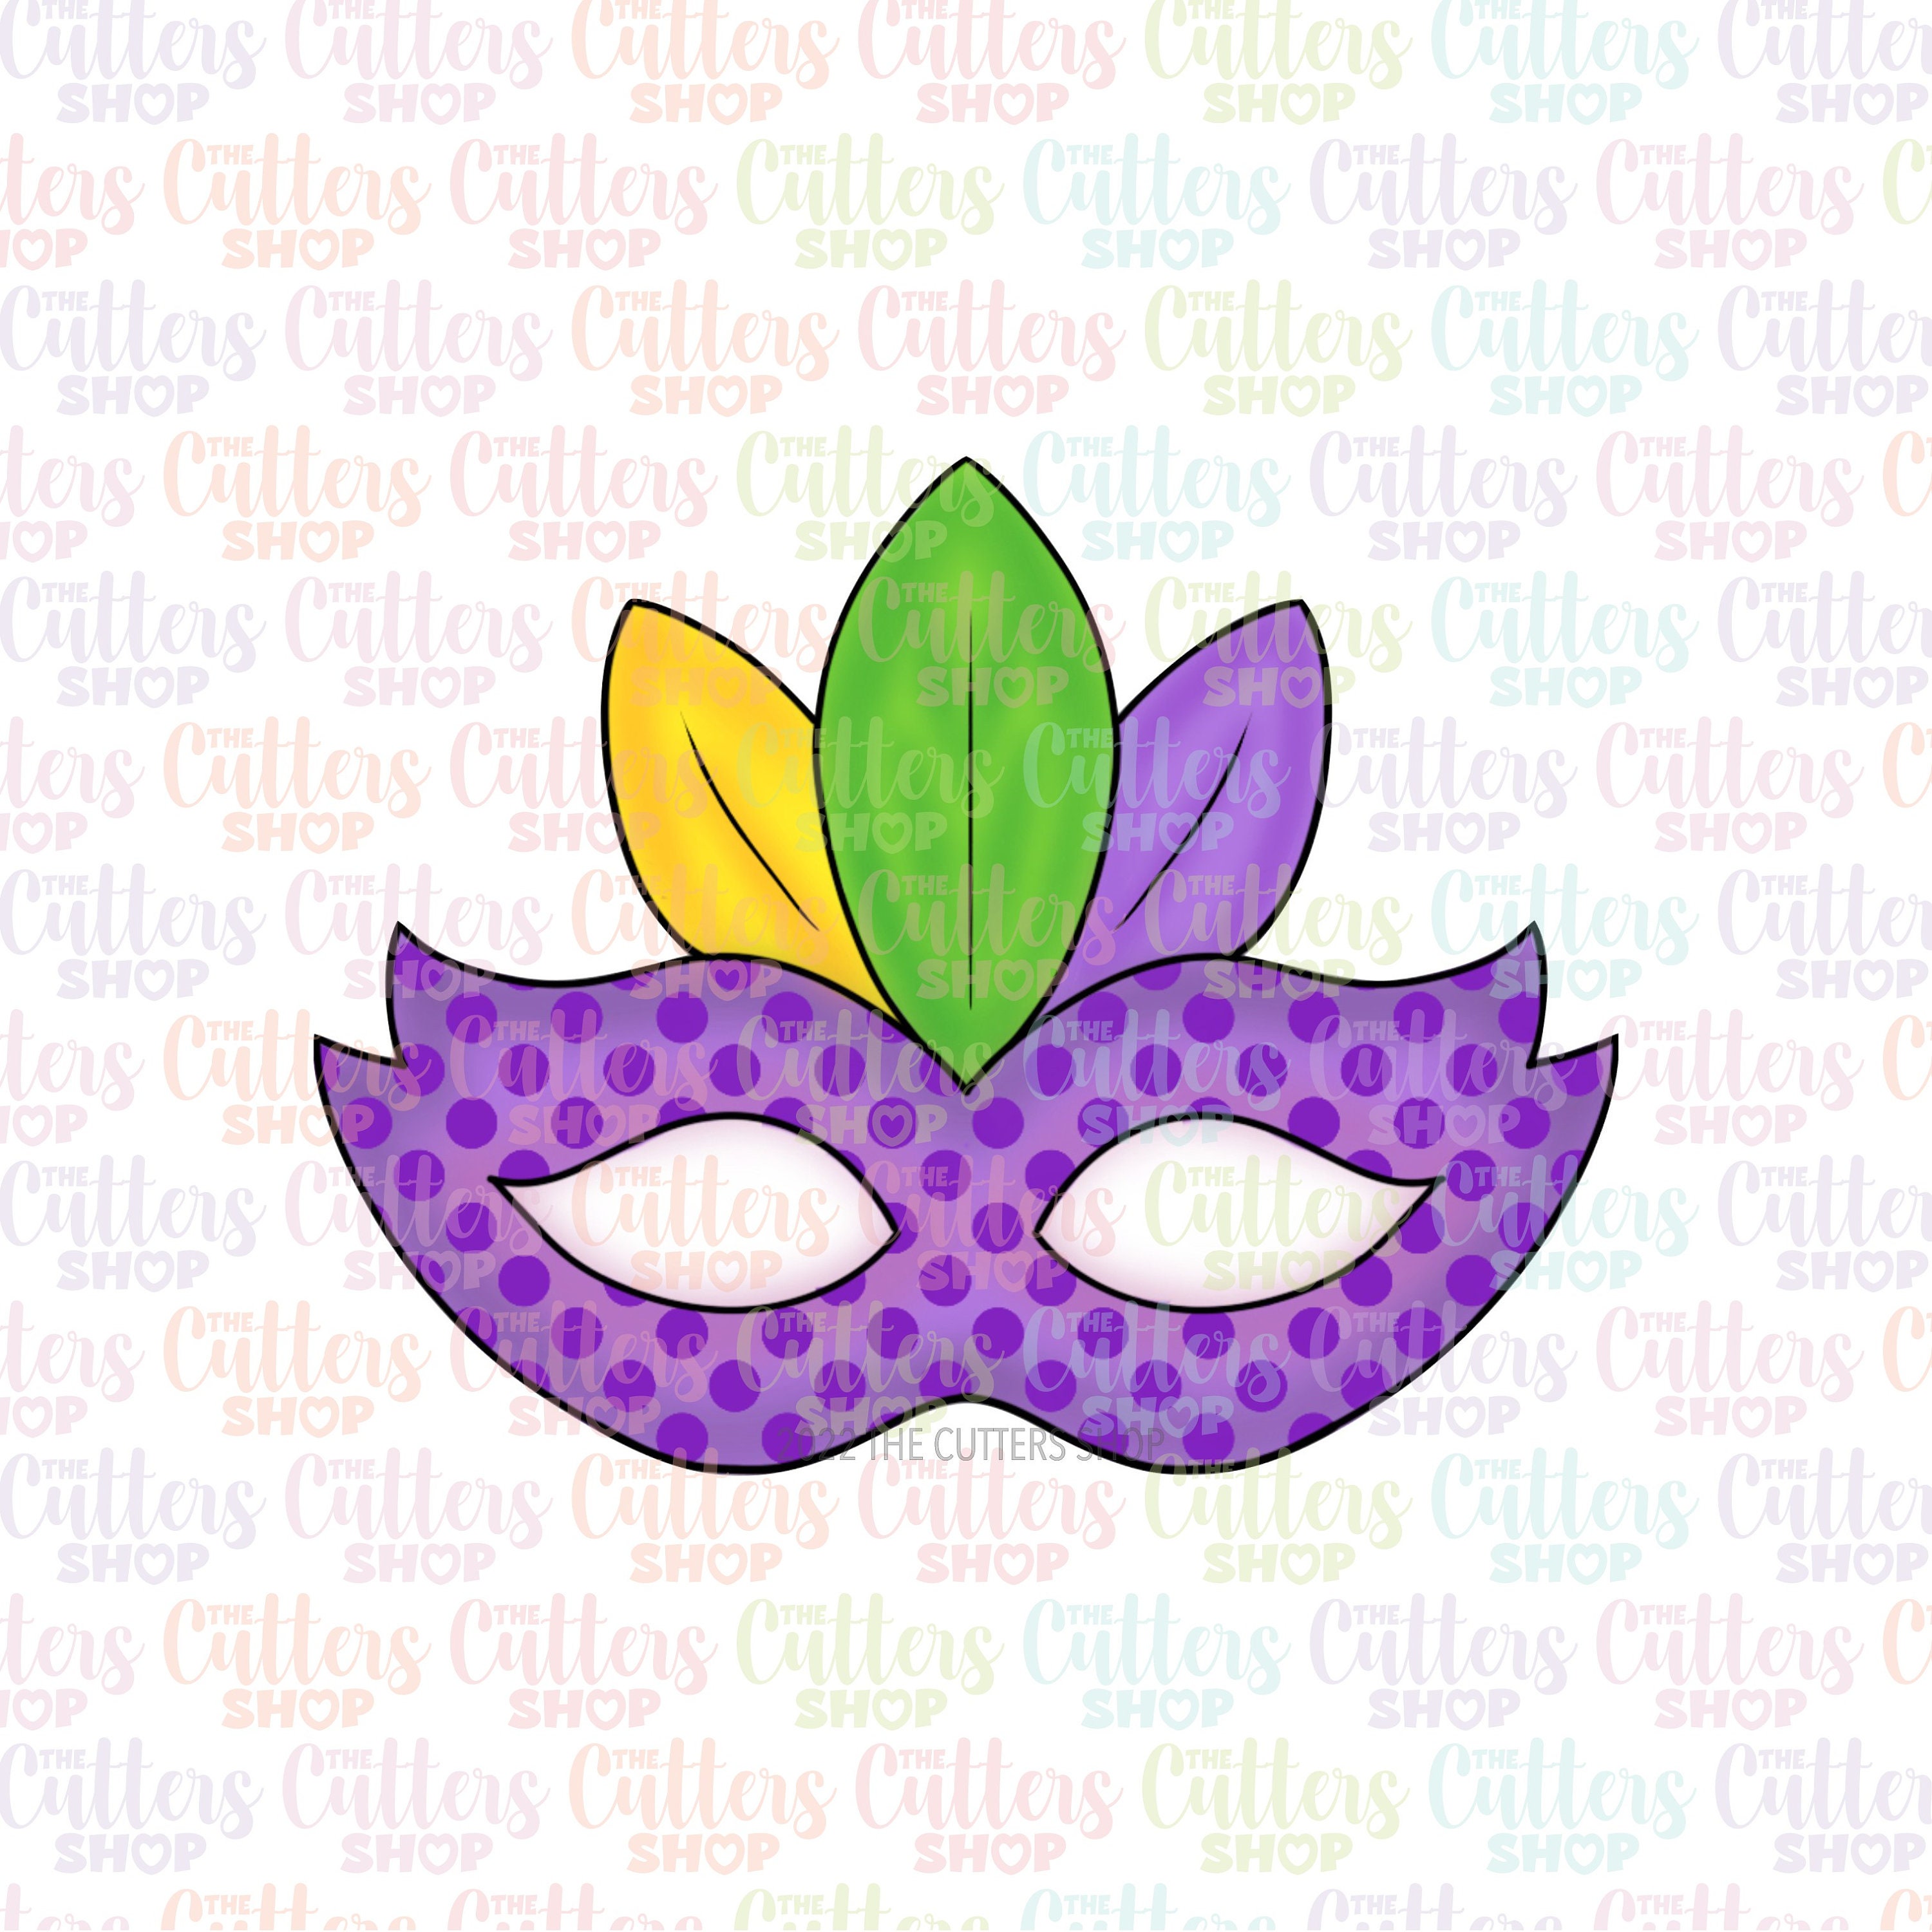 Mardi Gras Mask w/ Feathers Cookie Cutter